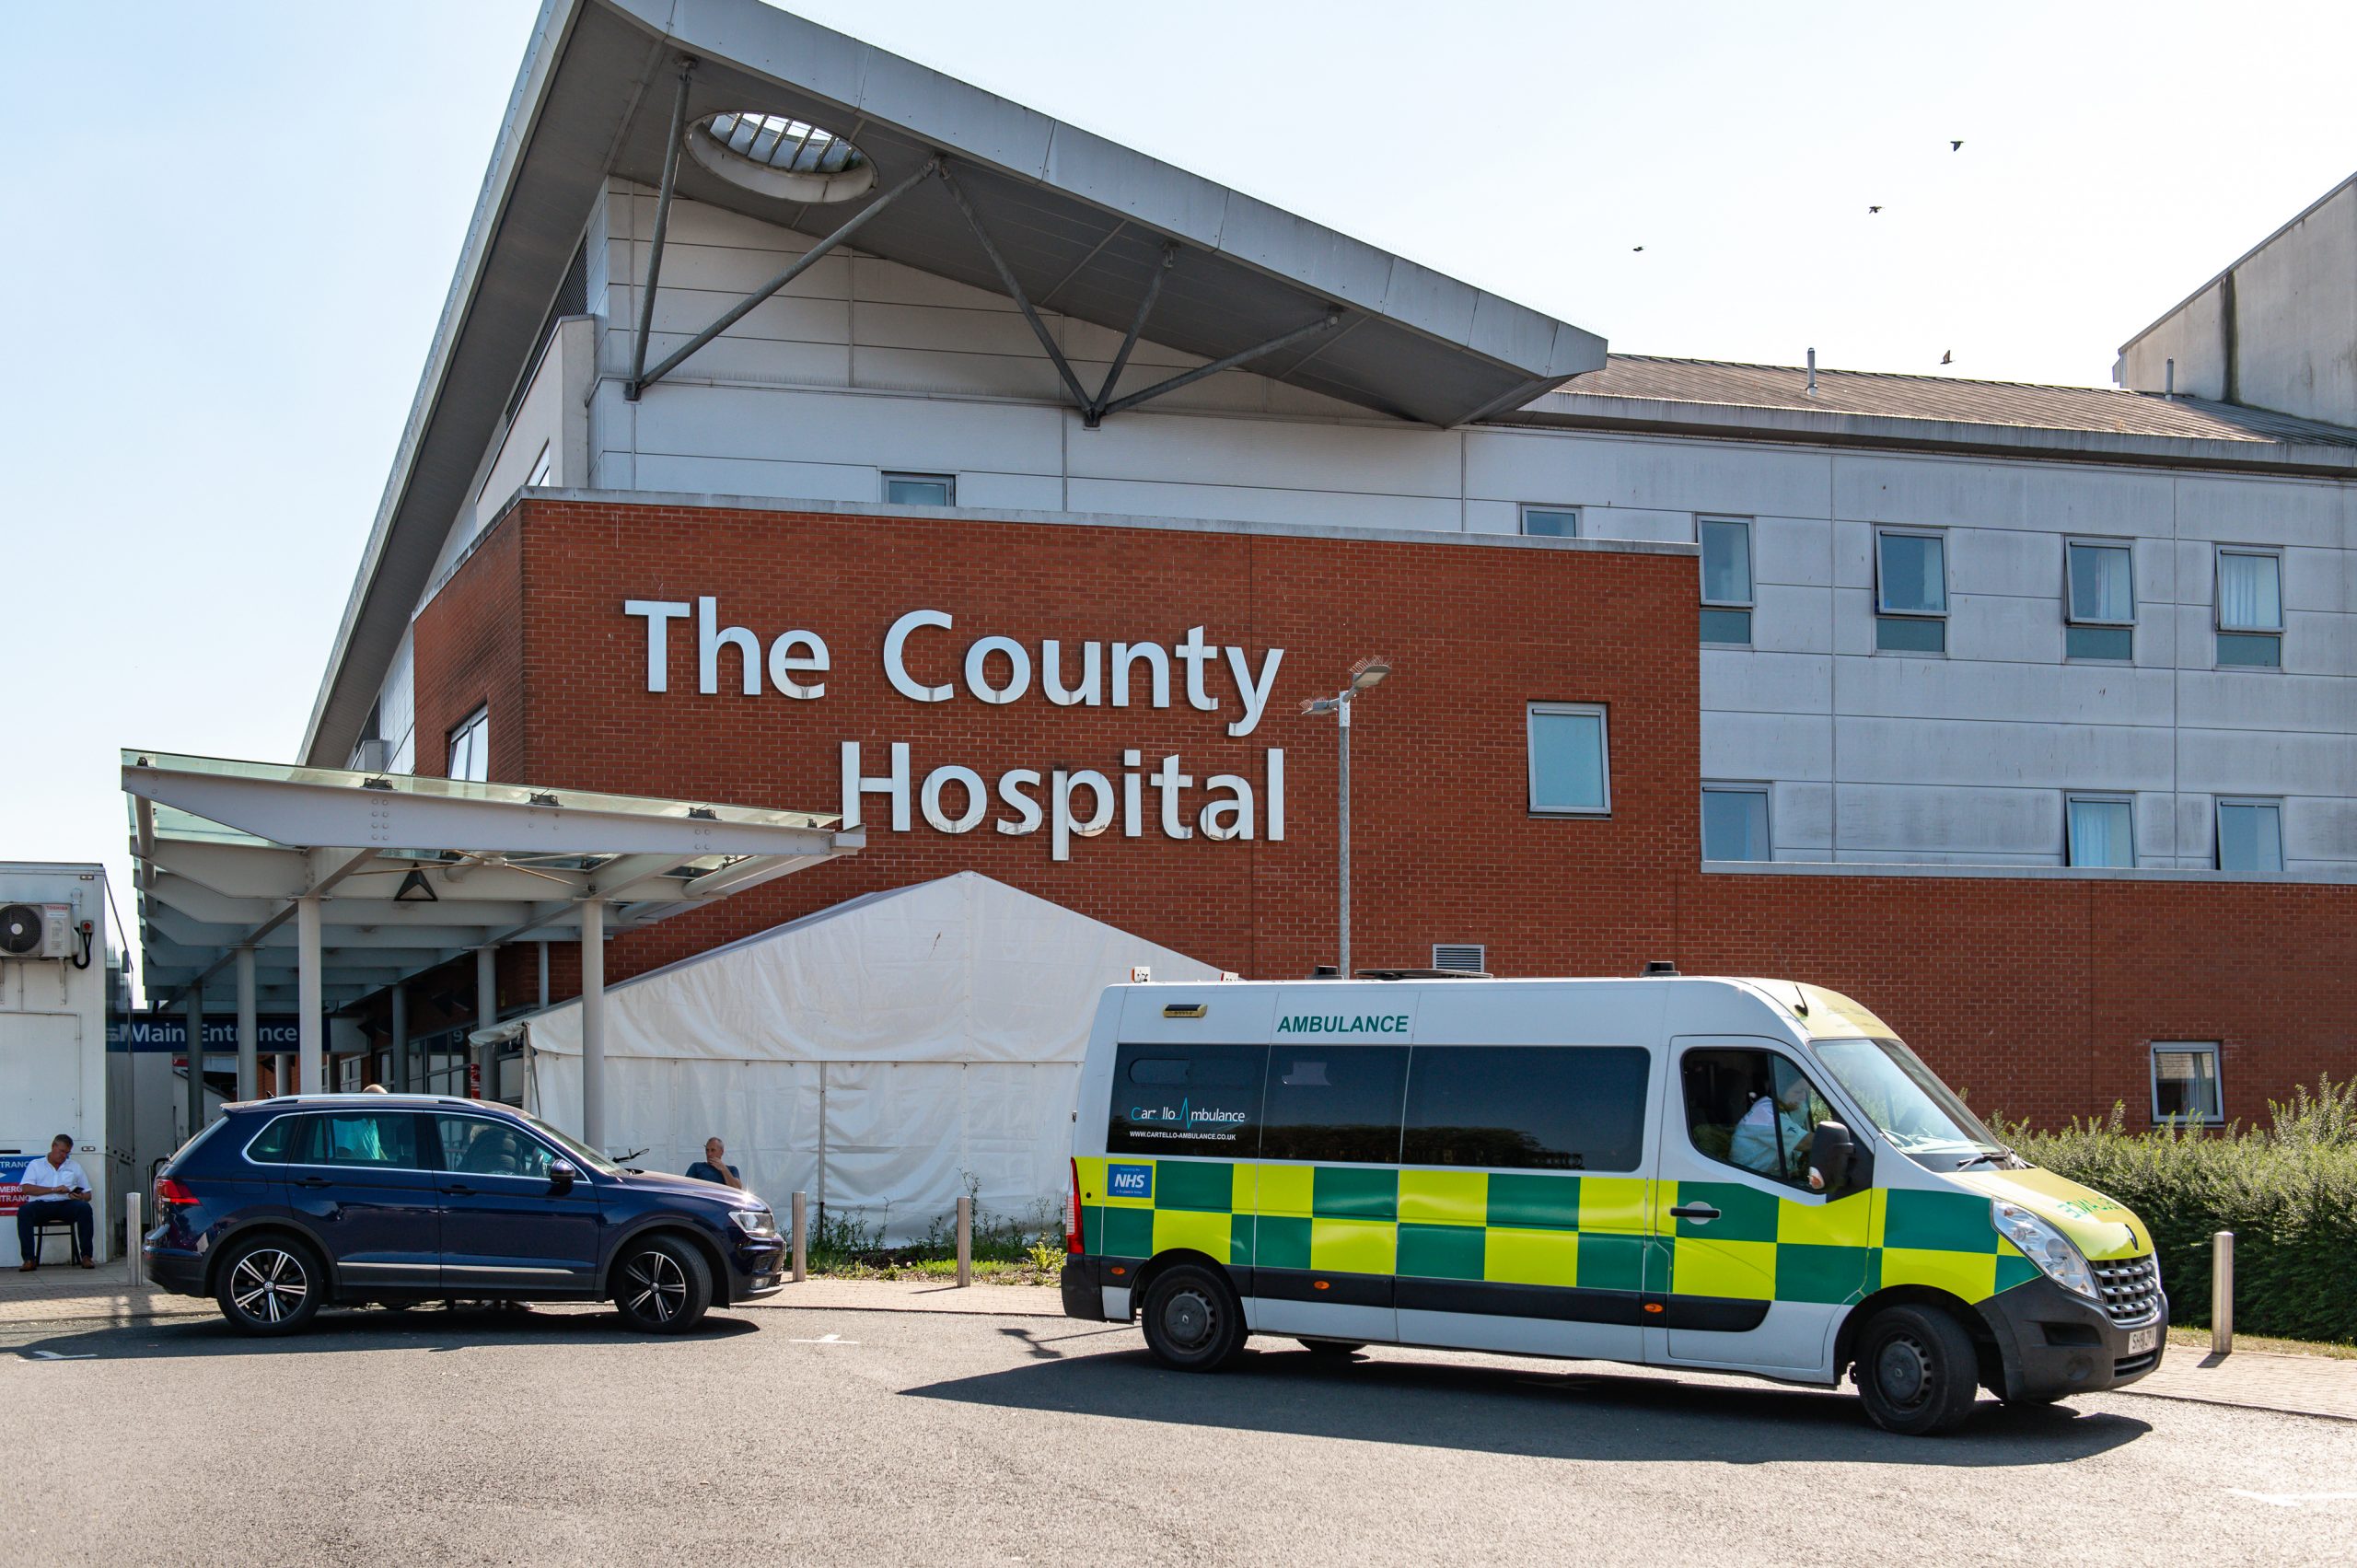 NEWS | Number of patients with COVID-19 at hospital in Herefordshire has fallen despite record case numbers